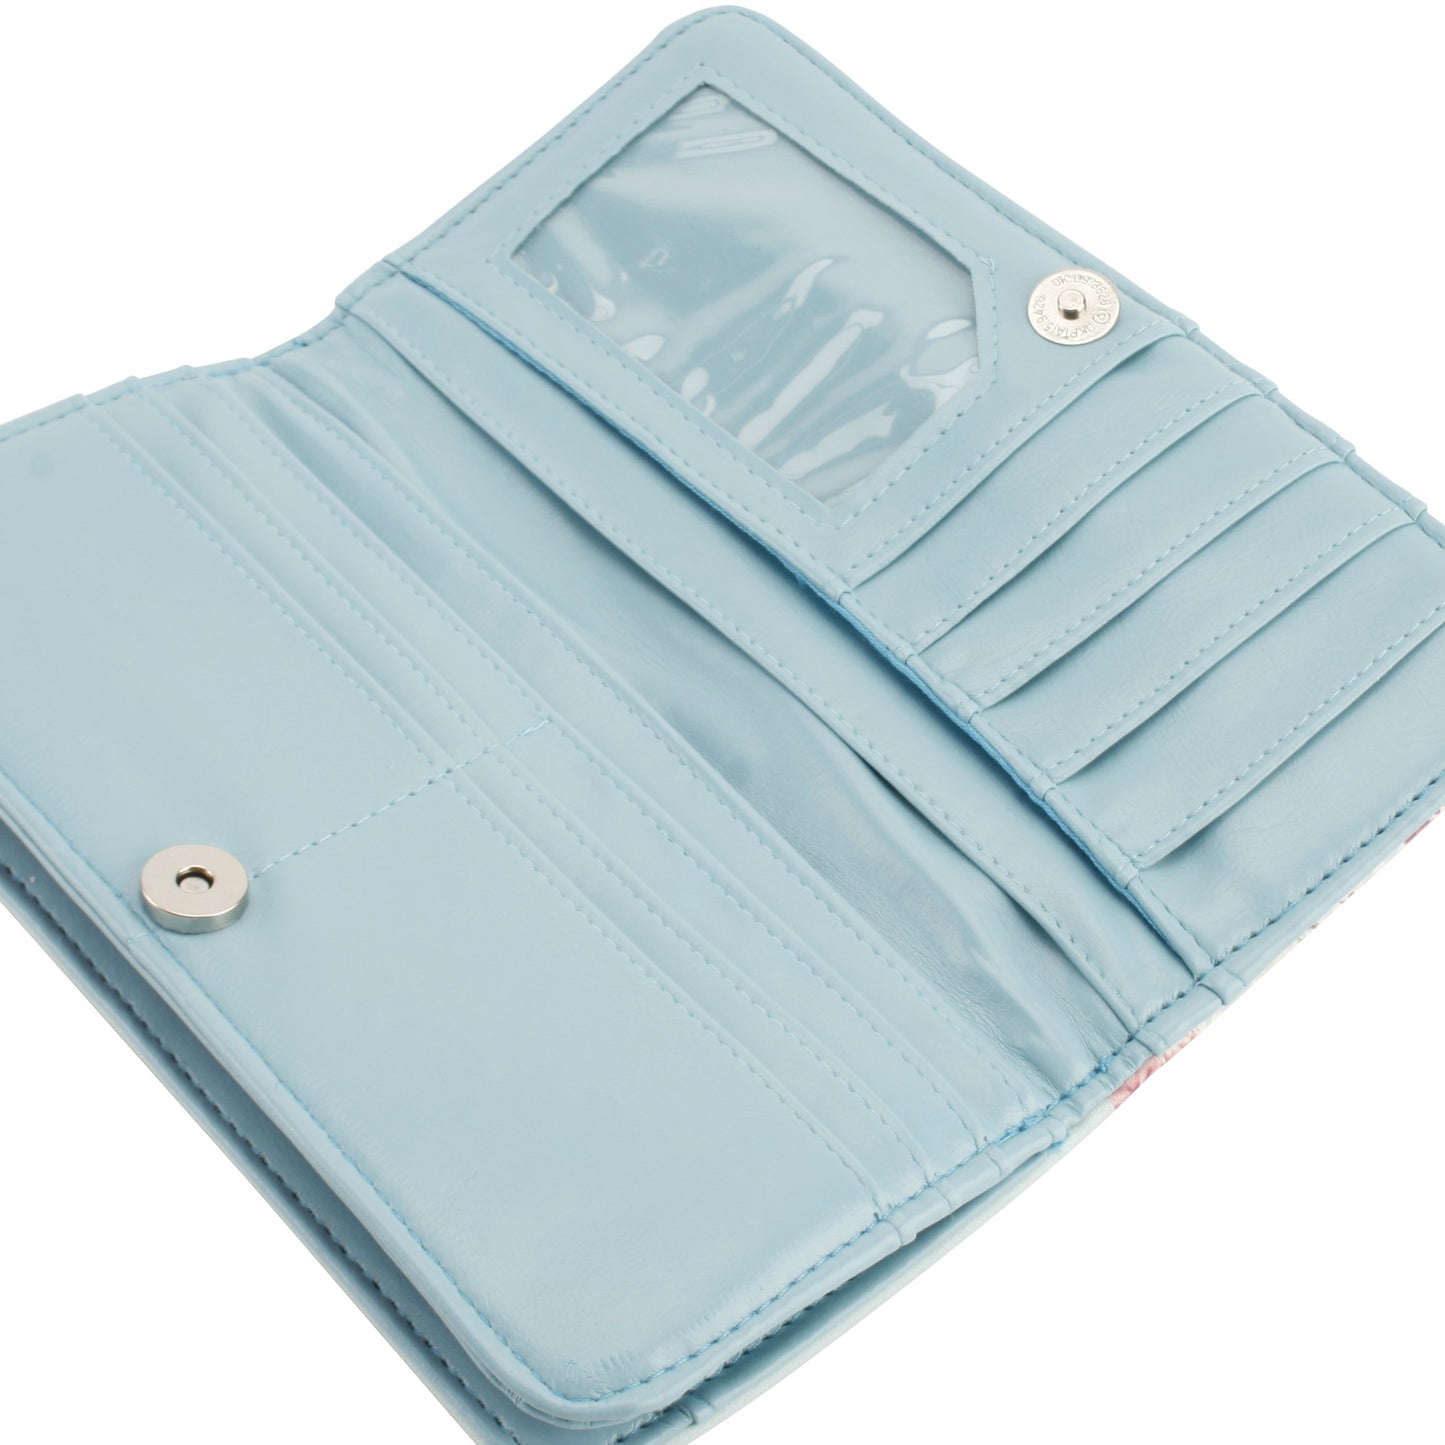 Blue purse interior with card slots and zipped coin area